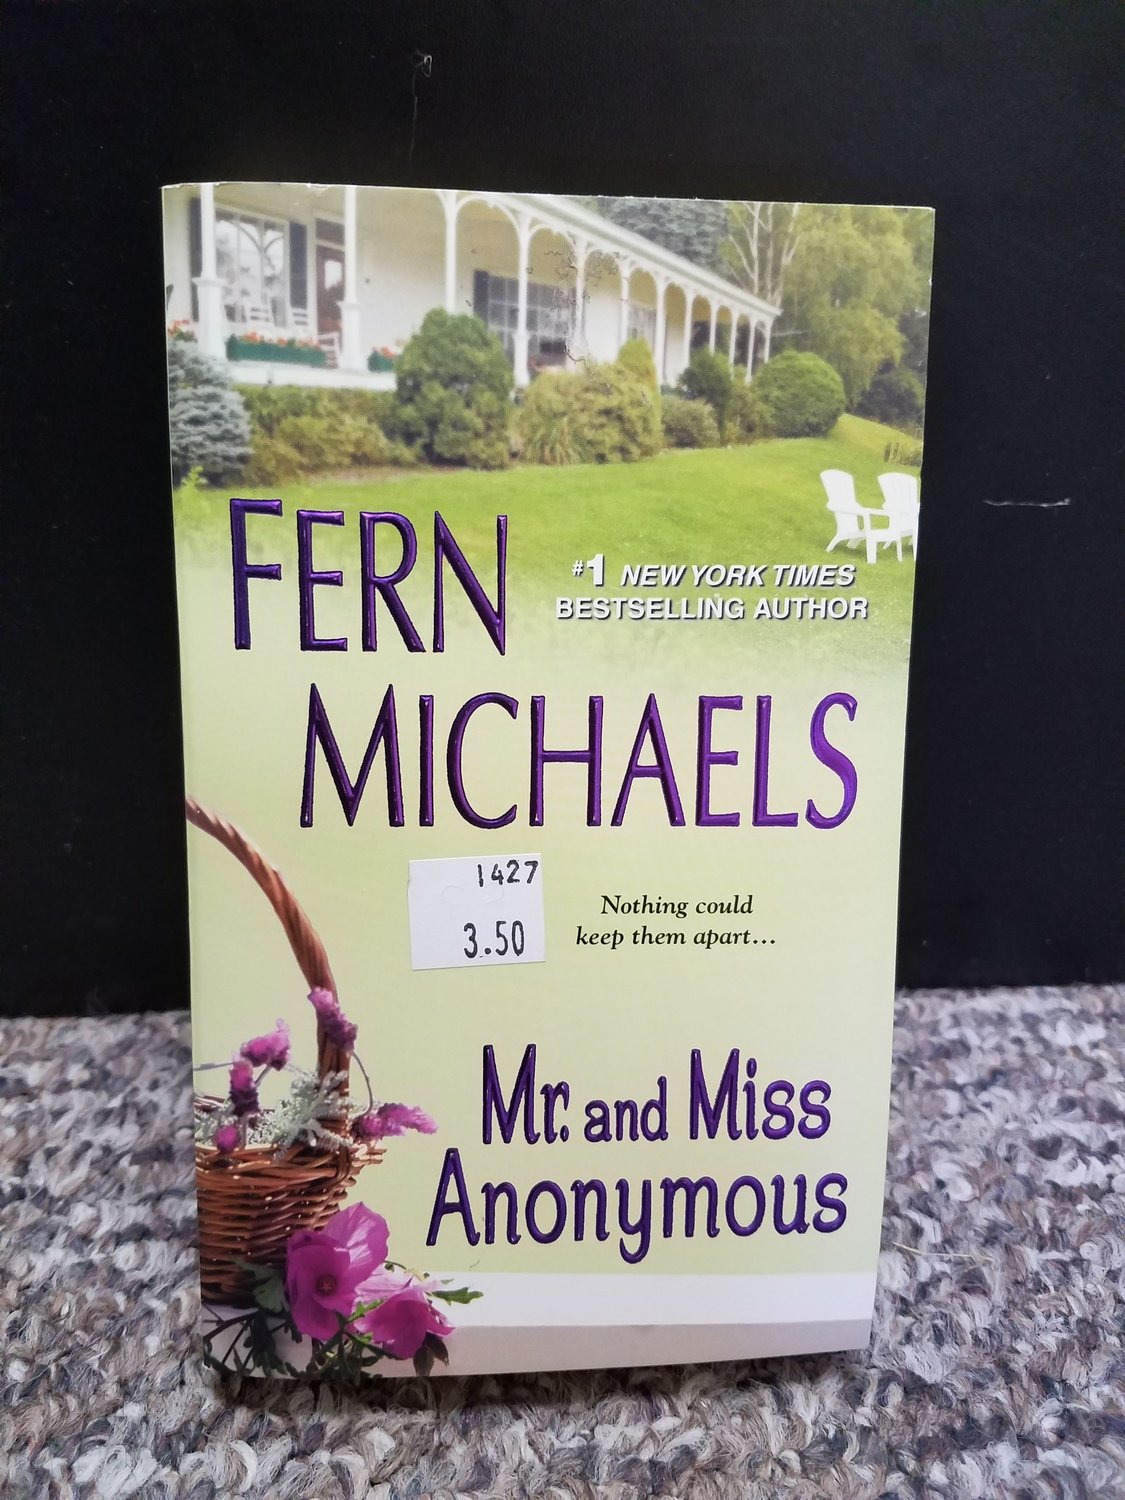 Mr. and Miss Anonymous by Fern Michaels